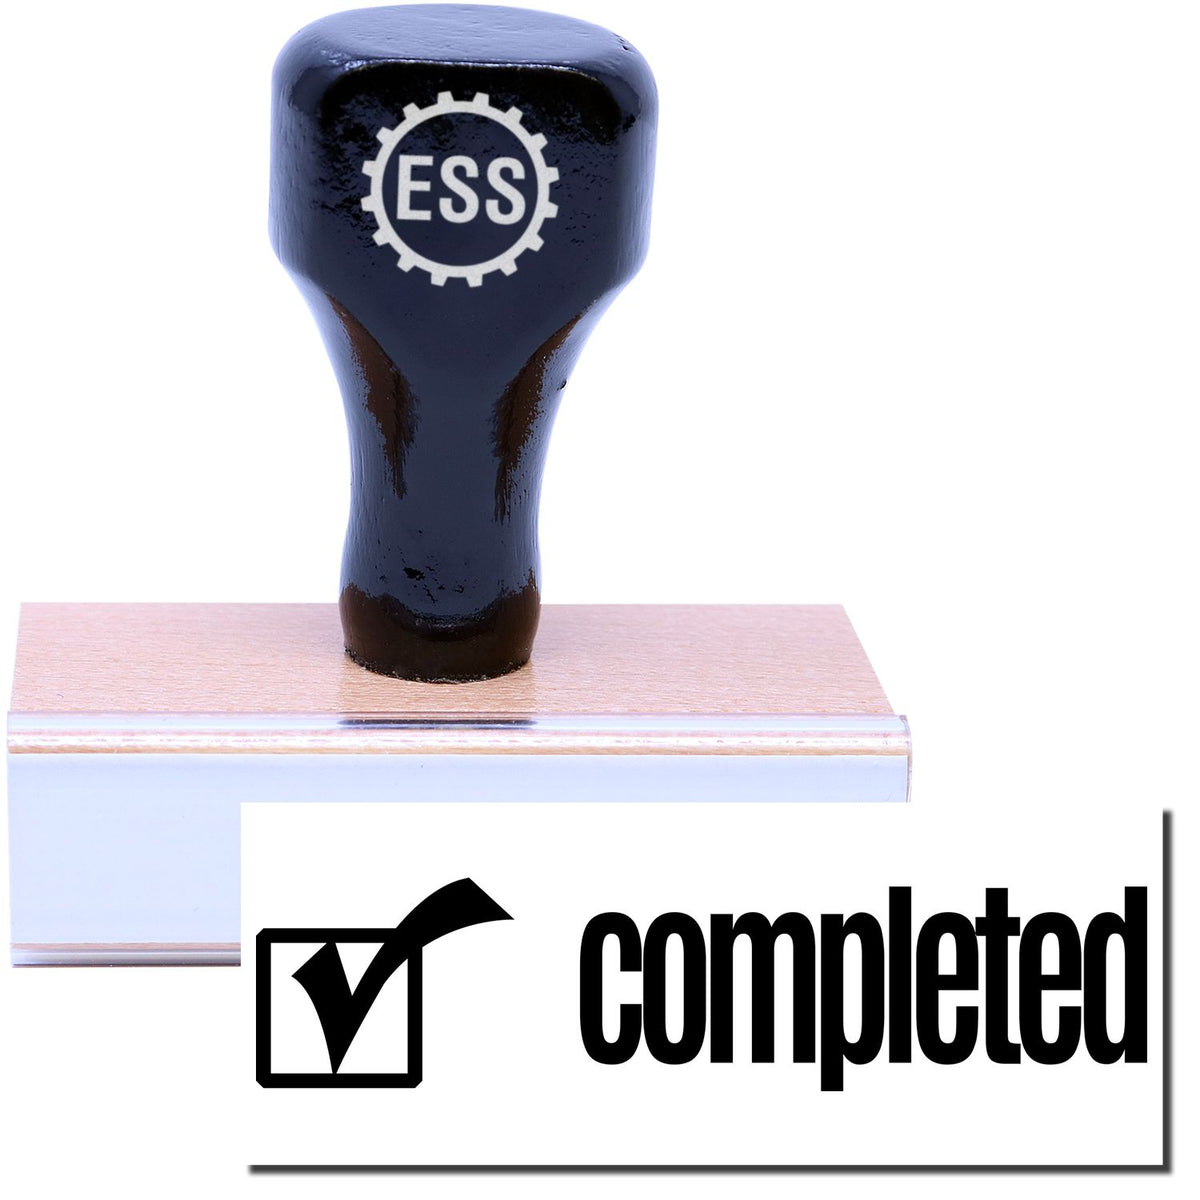 A stock office rubber stamp with a stamped image showing how the text &quot;completed&quot; in a large font with an image of a checkbox on the left side is displayed after stamping.